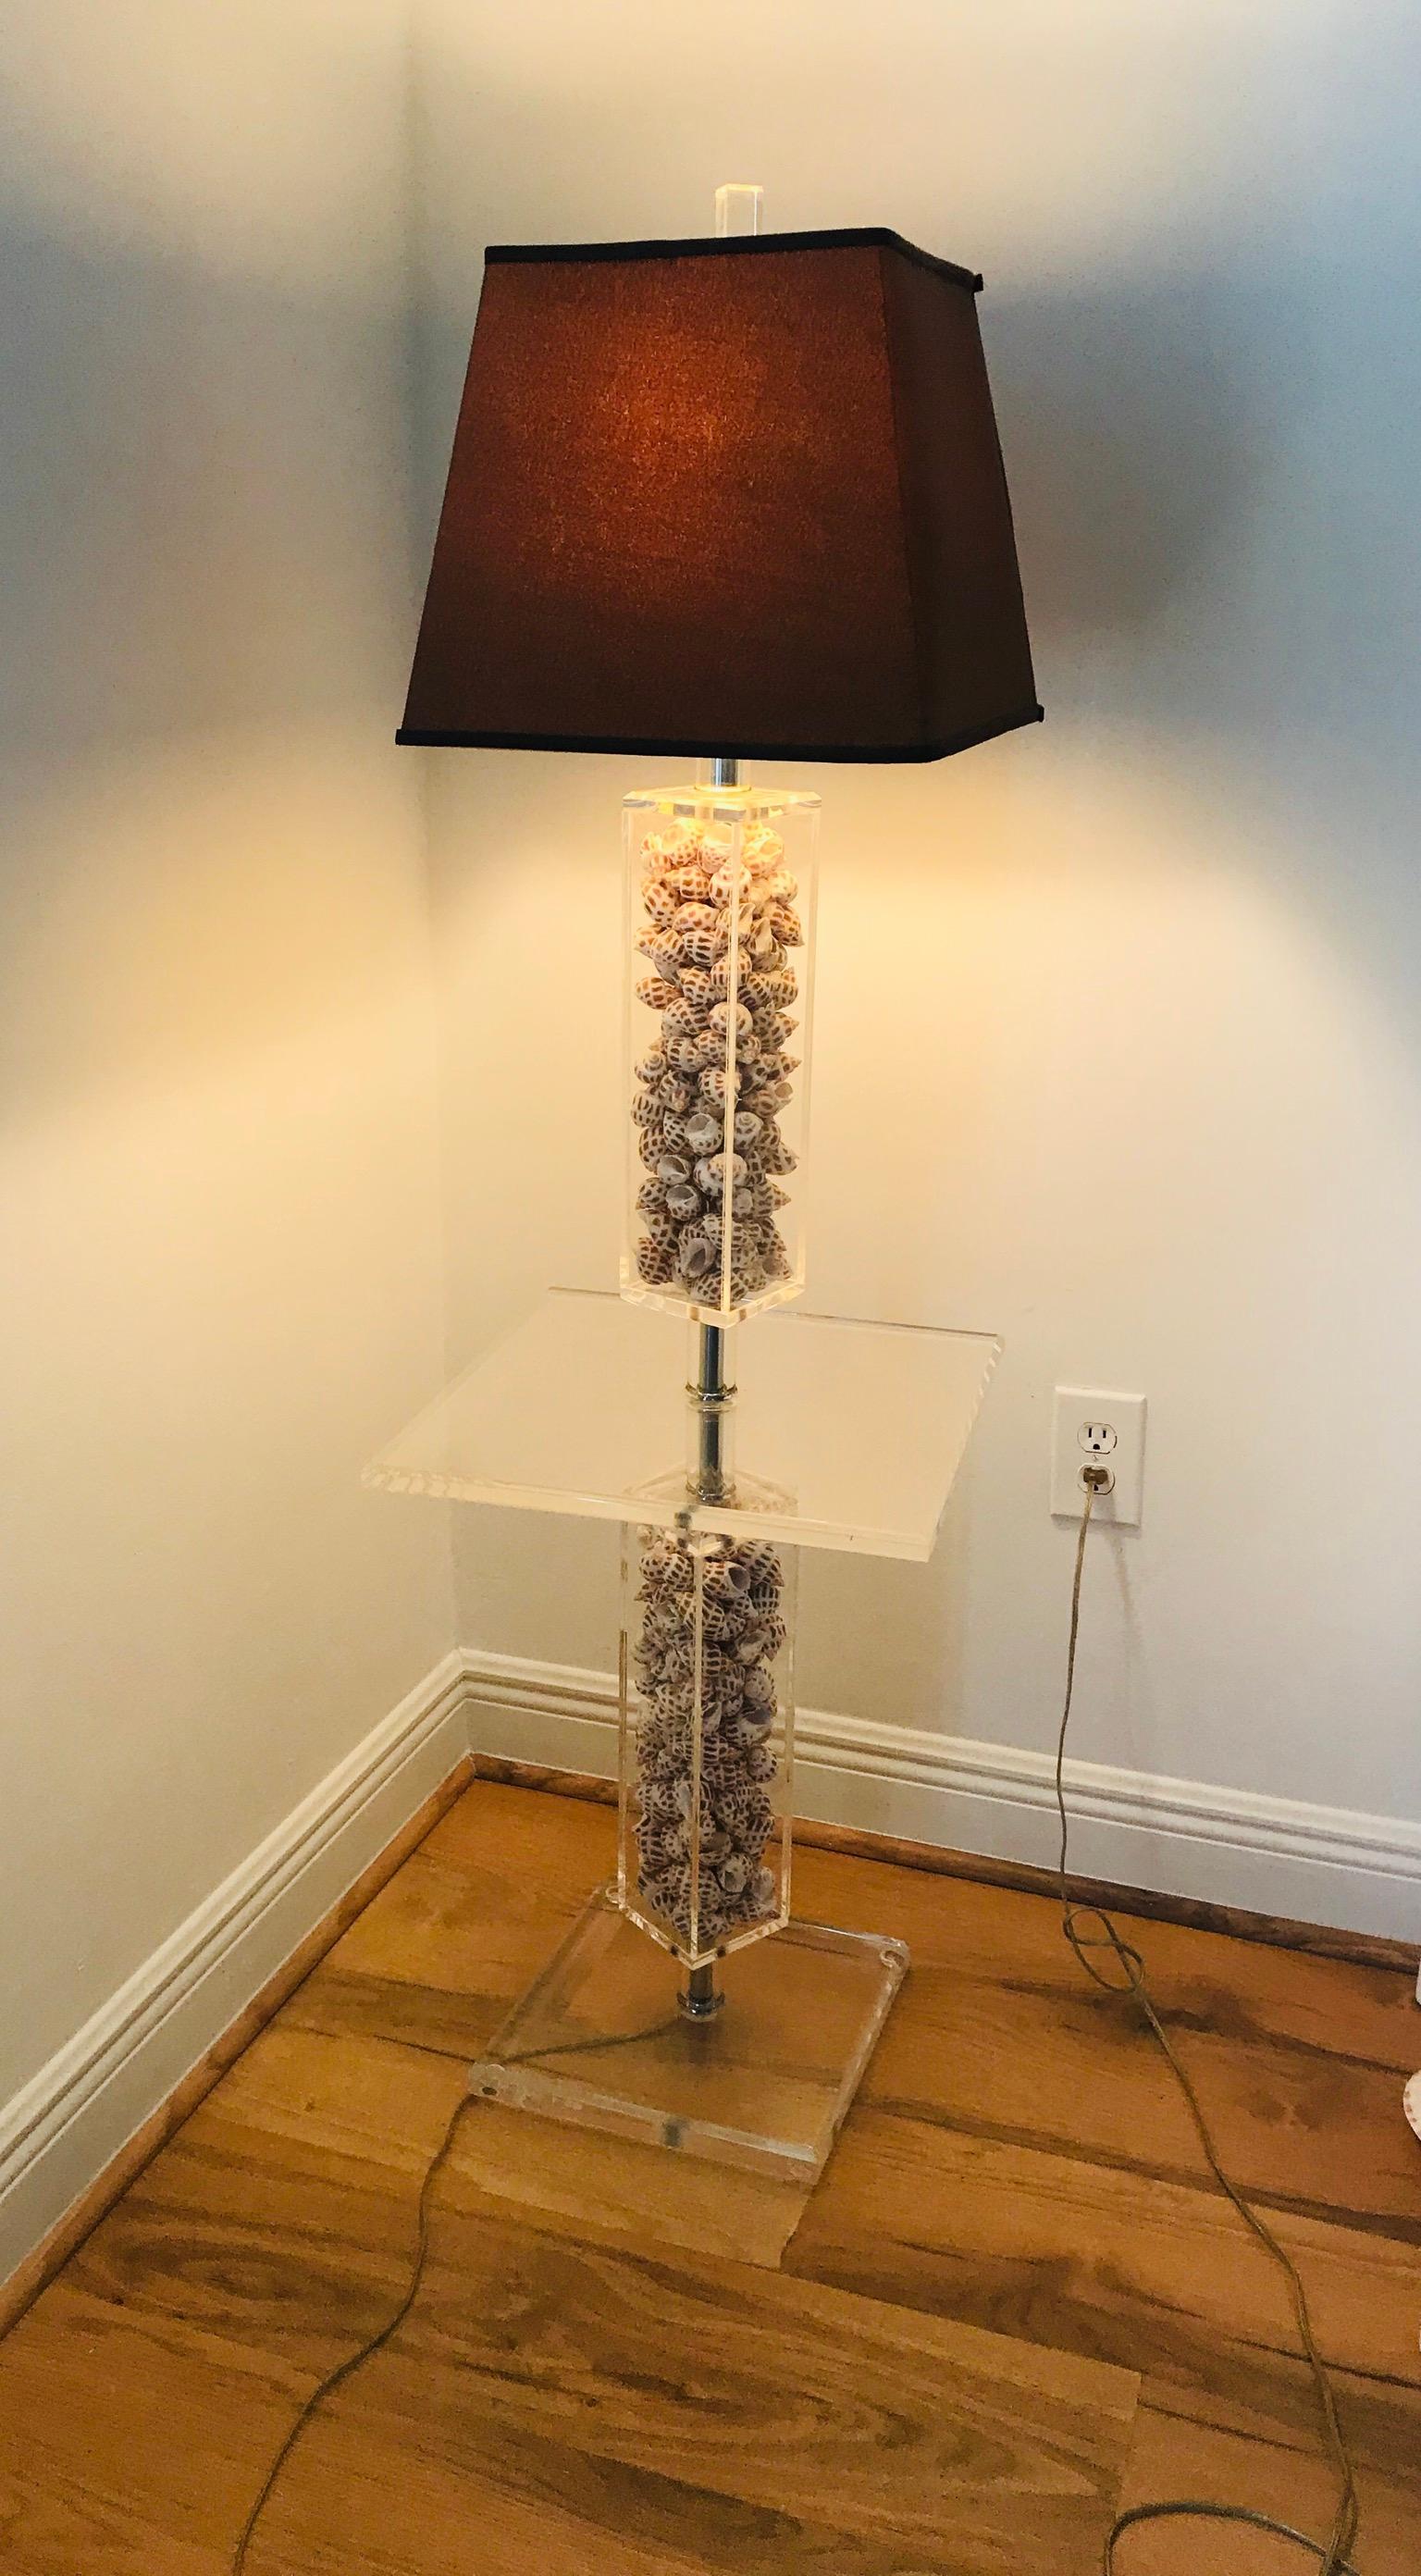 Vintage Mid Century Modern Lucite Shell Floor Lamp In Good Condition For Sale In Boca Raton, FL